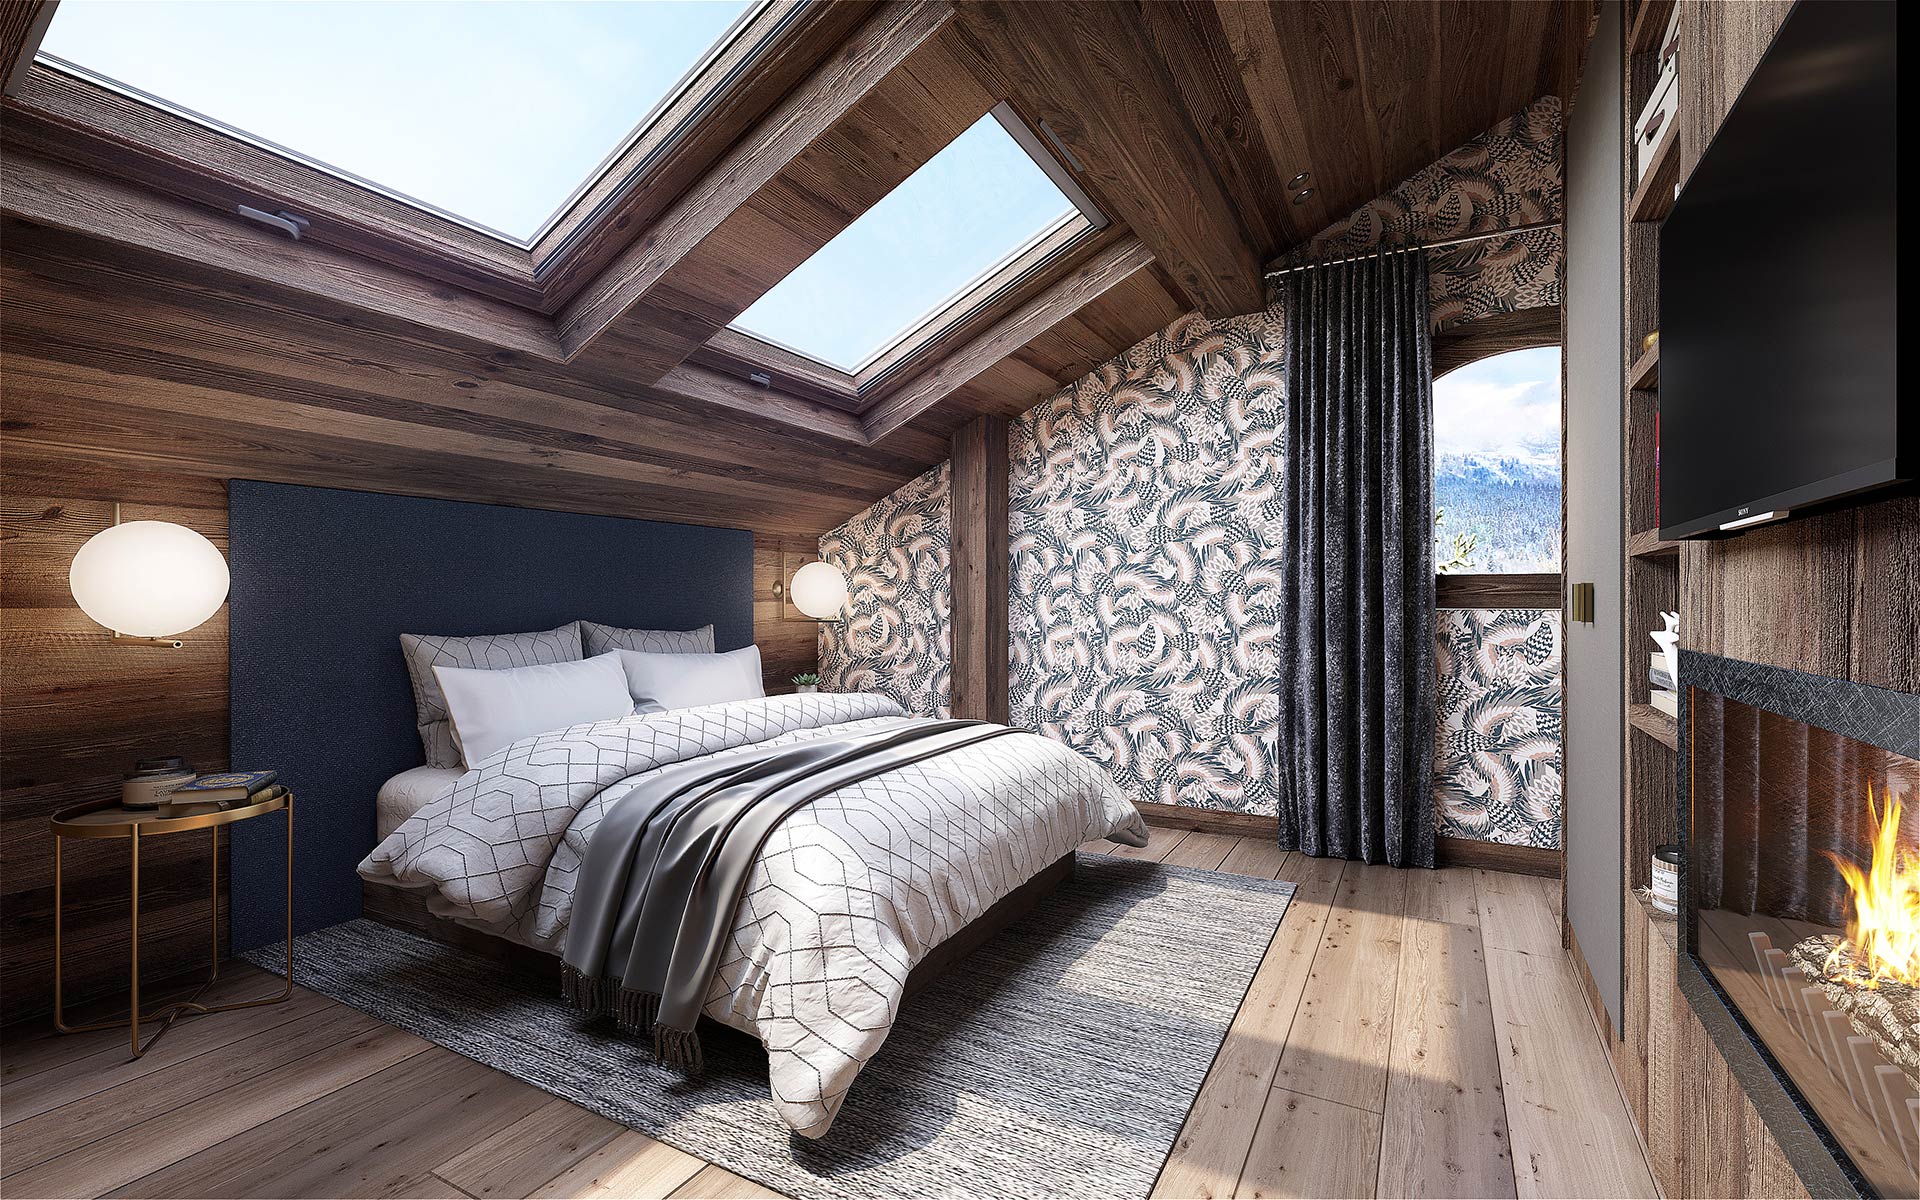 3D image of a bedroom in a luxury chalet